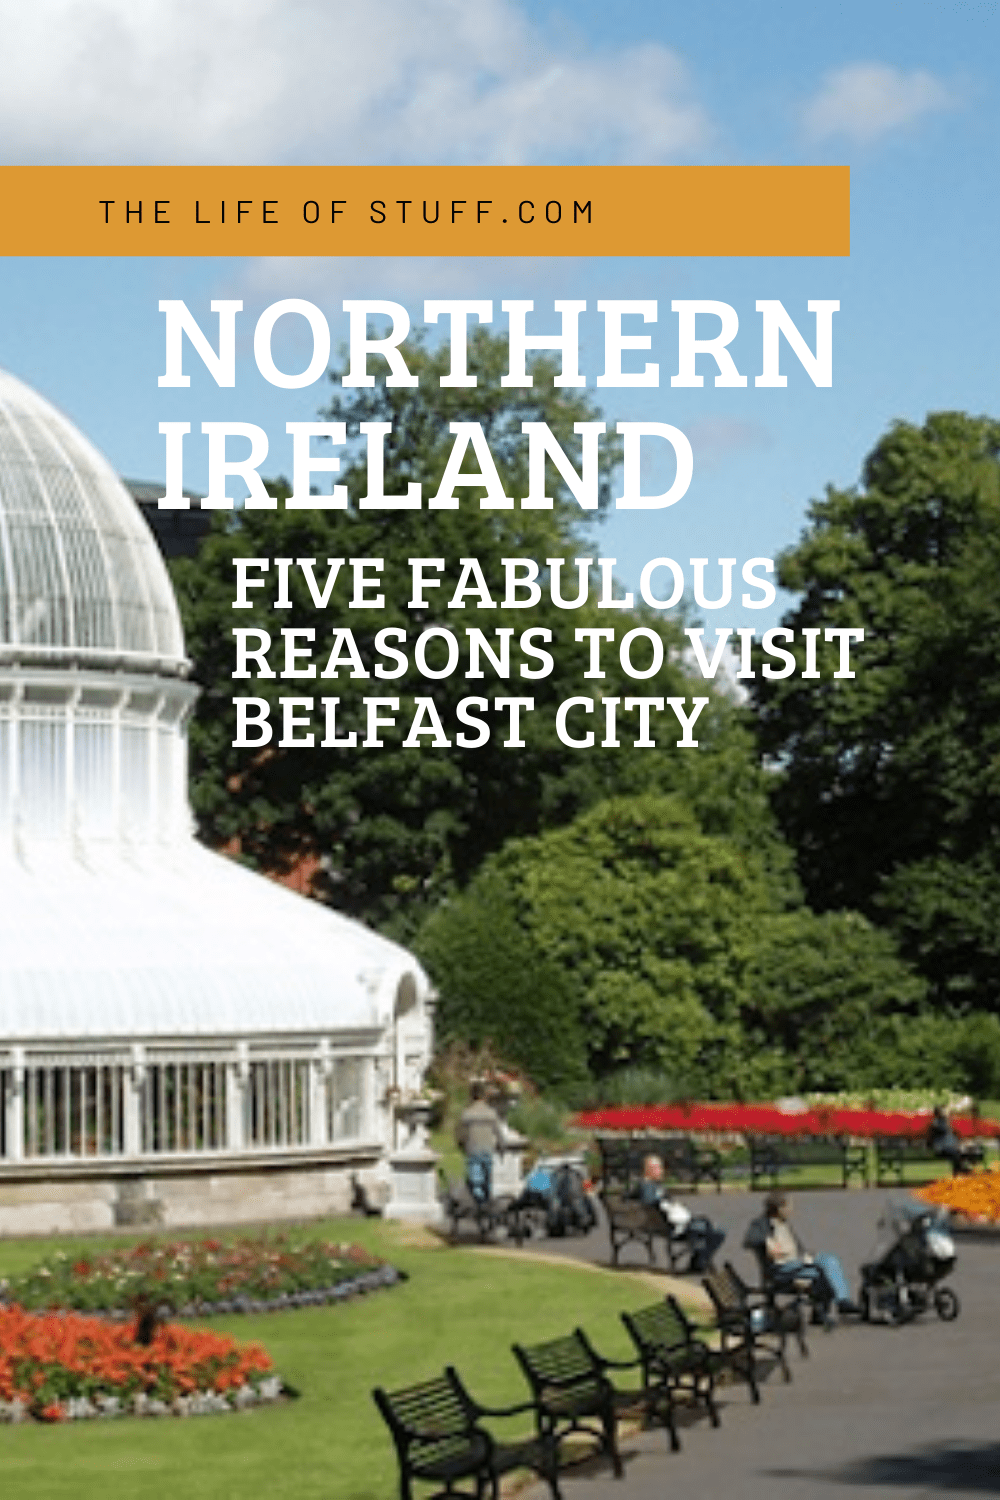 Five Fabulous Reasons to Visit Belfast City - The Life of Stuff